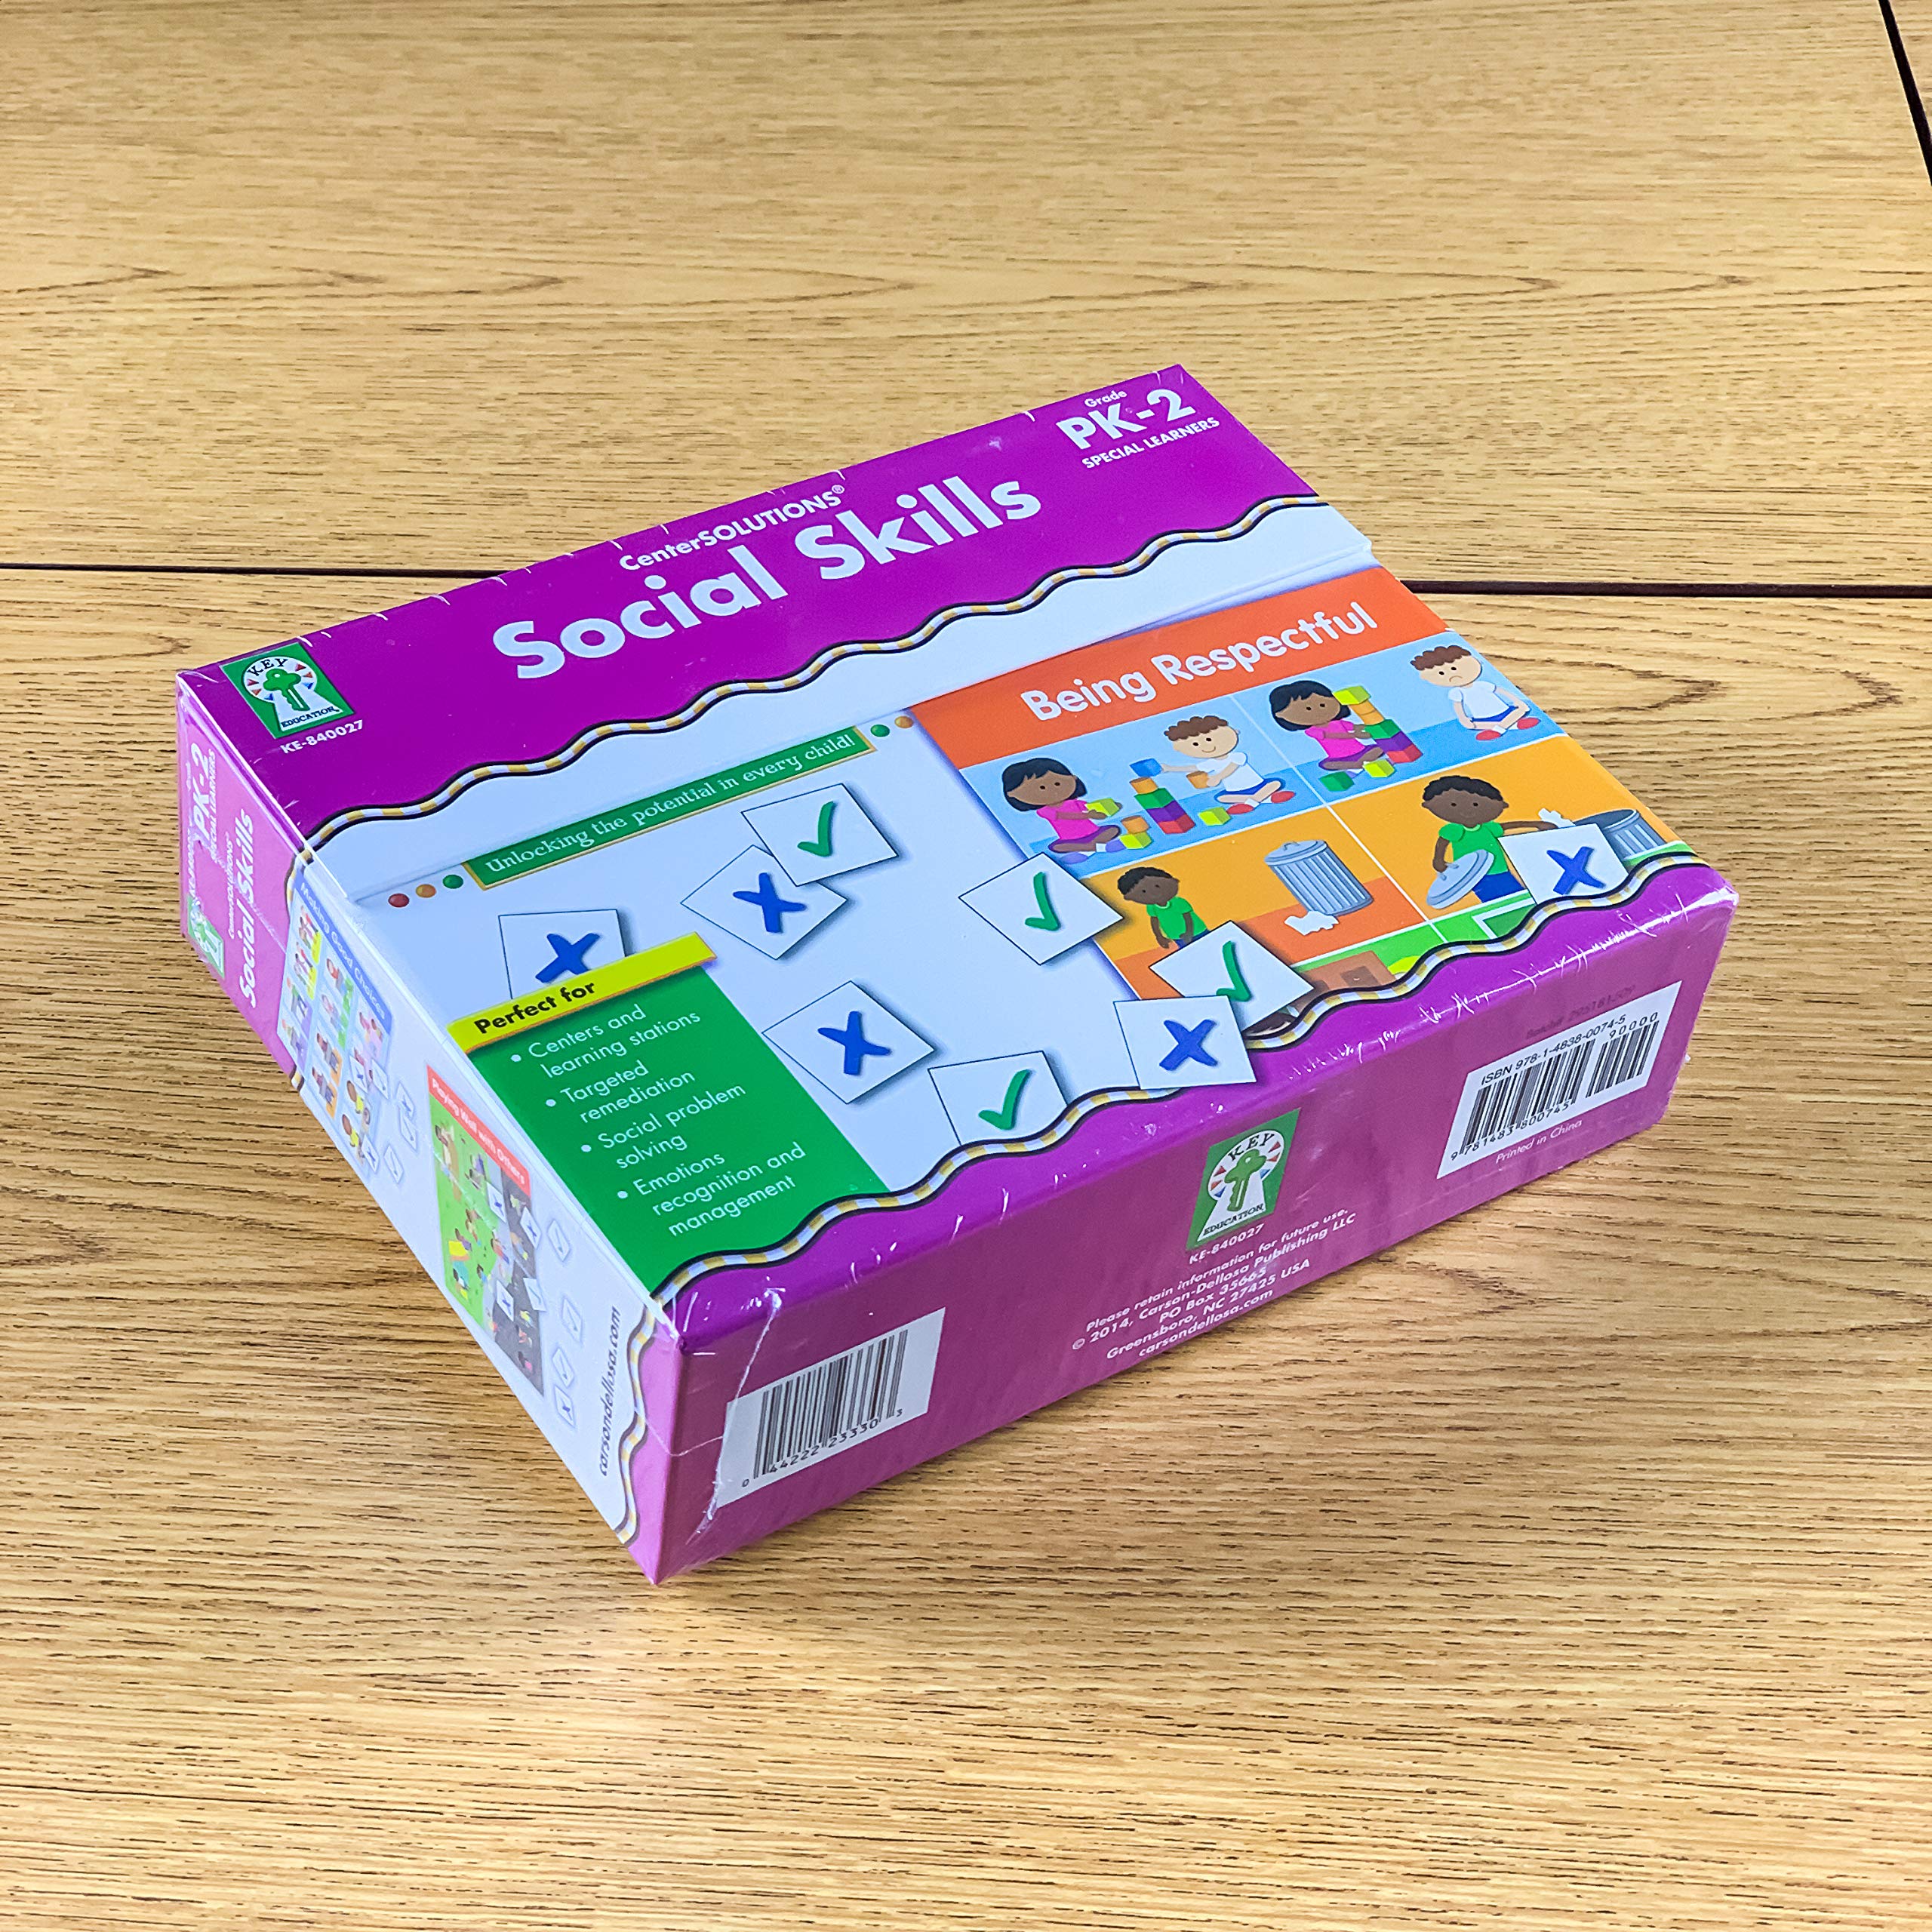 Key Education Social Skills Boxed Game Set, 15 Board Games With Social Emotional Learning Activities, File Folder Social Skills Learning Games for Autism, Preschool, Kindergarten, 1st and 2nd Grade